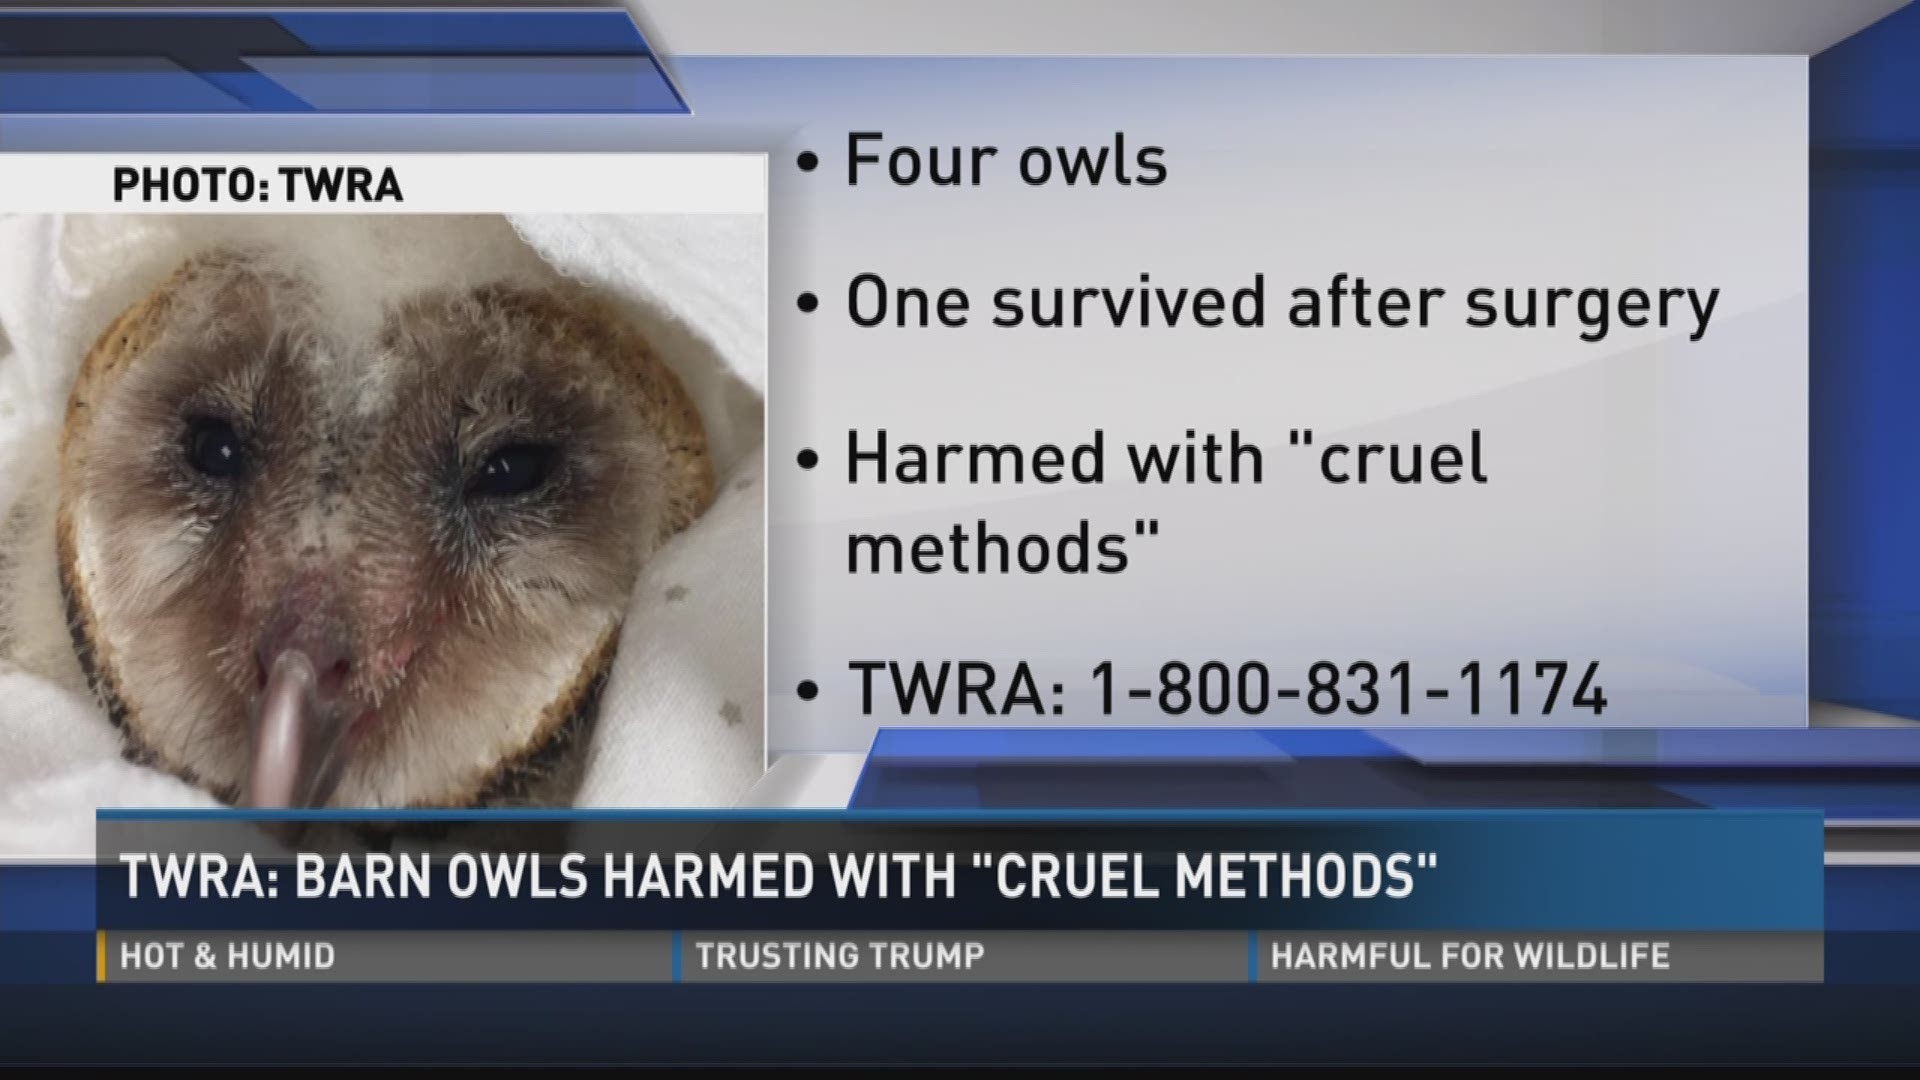 June 29, 2017: Wildlife officials say four barn owls were abused at a business in Alcoa.